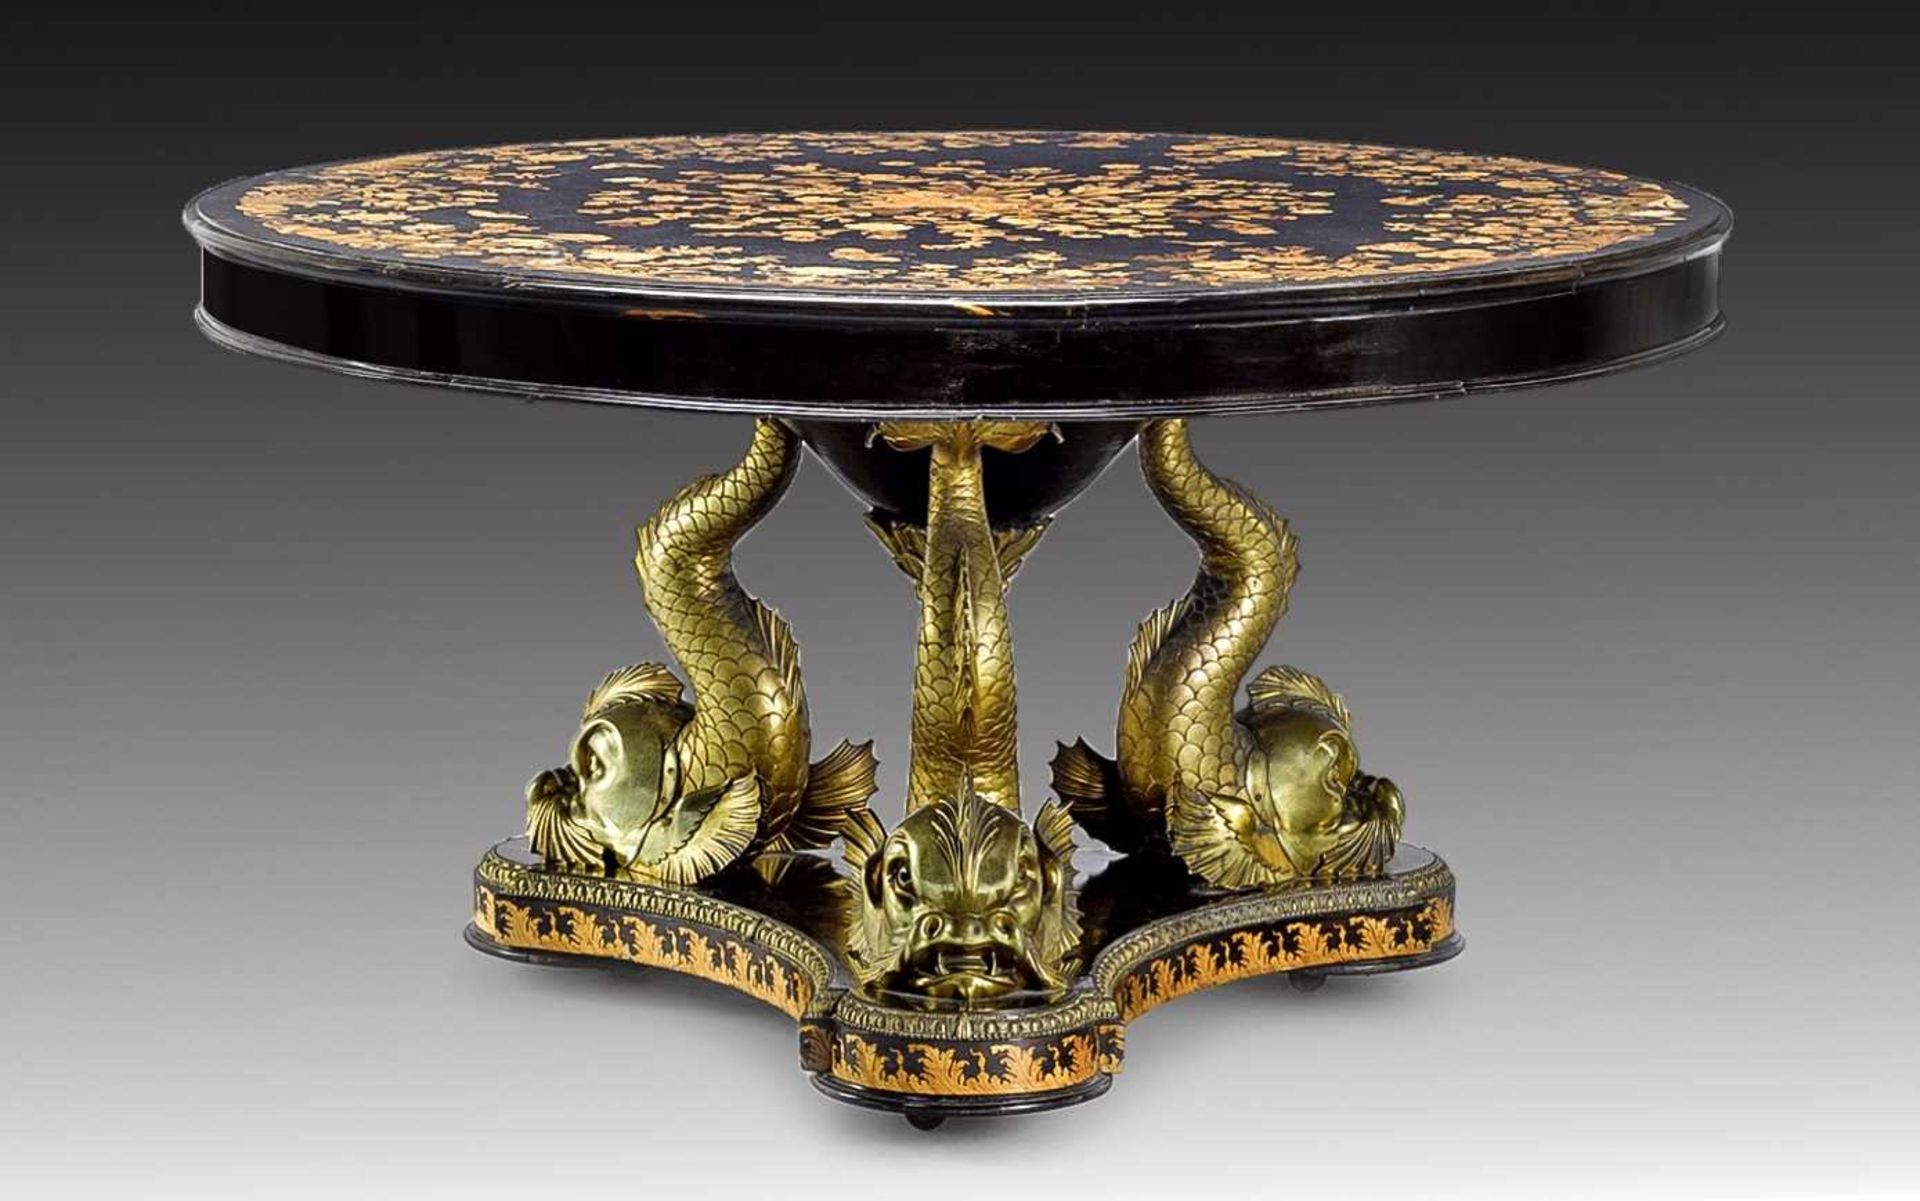 THE ROTHSCHILD MENTMORE EBONY, MARQUETRY AND ORMOLU CENTRE TABLE - Image 2 of 3